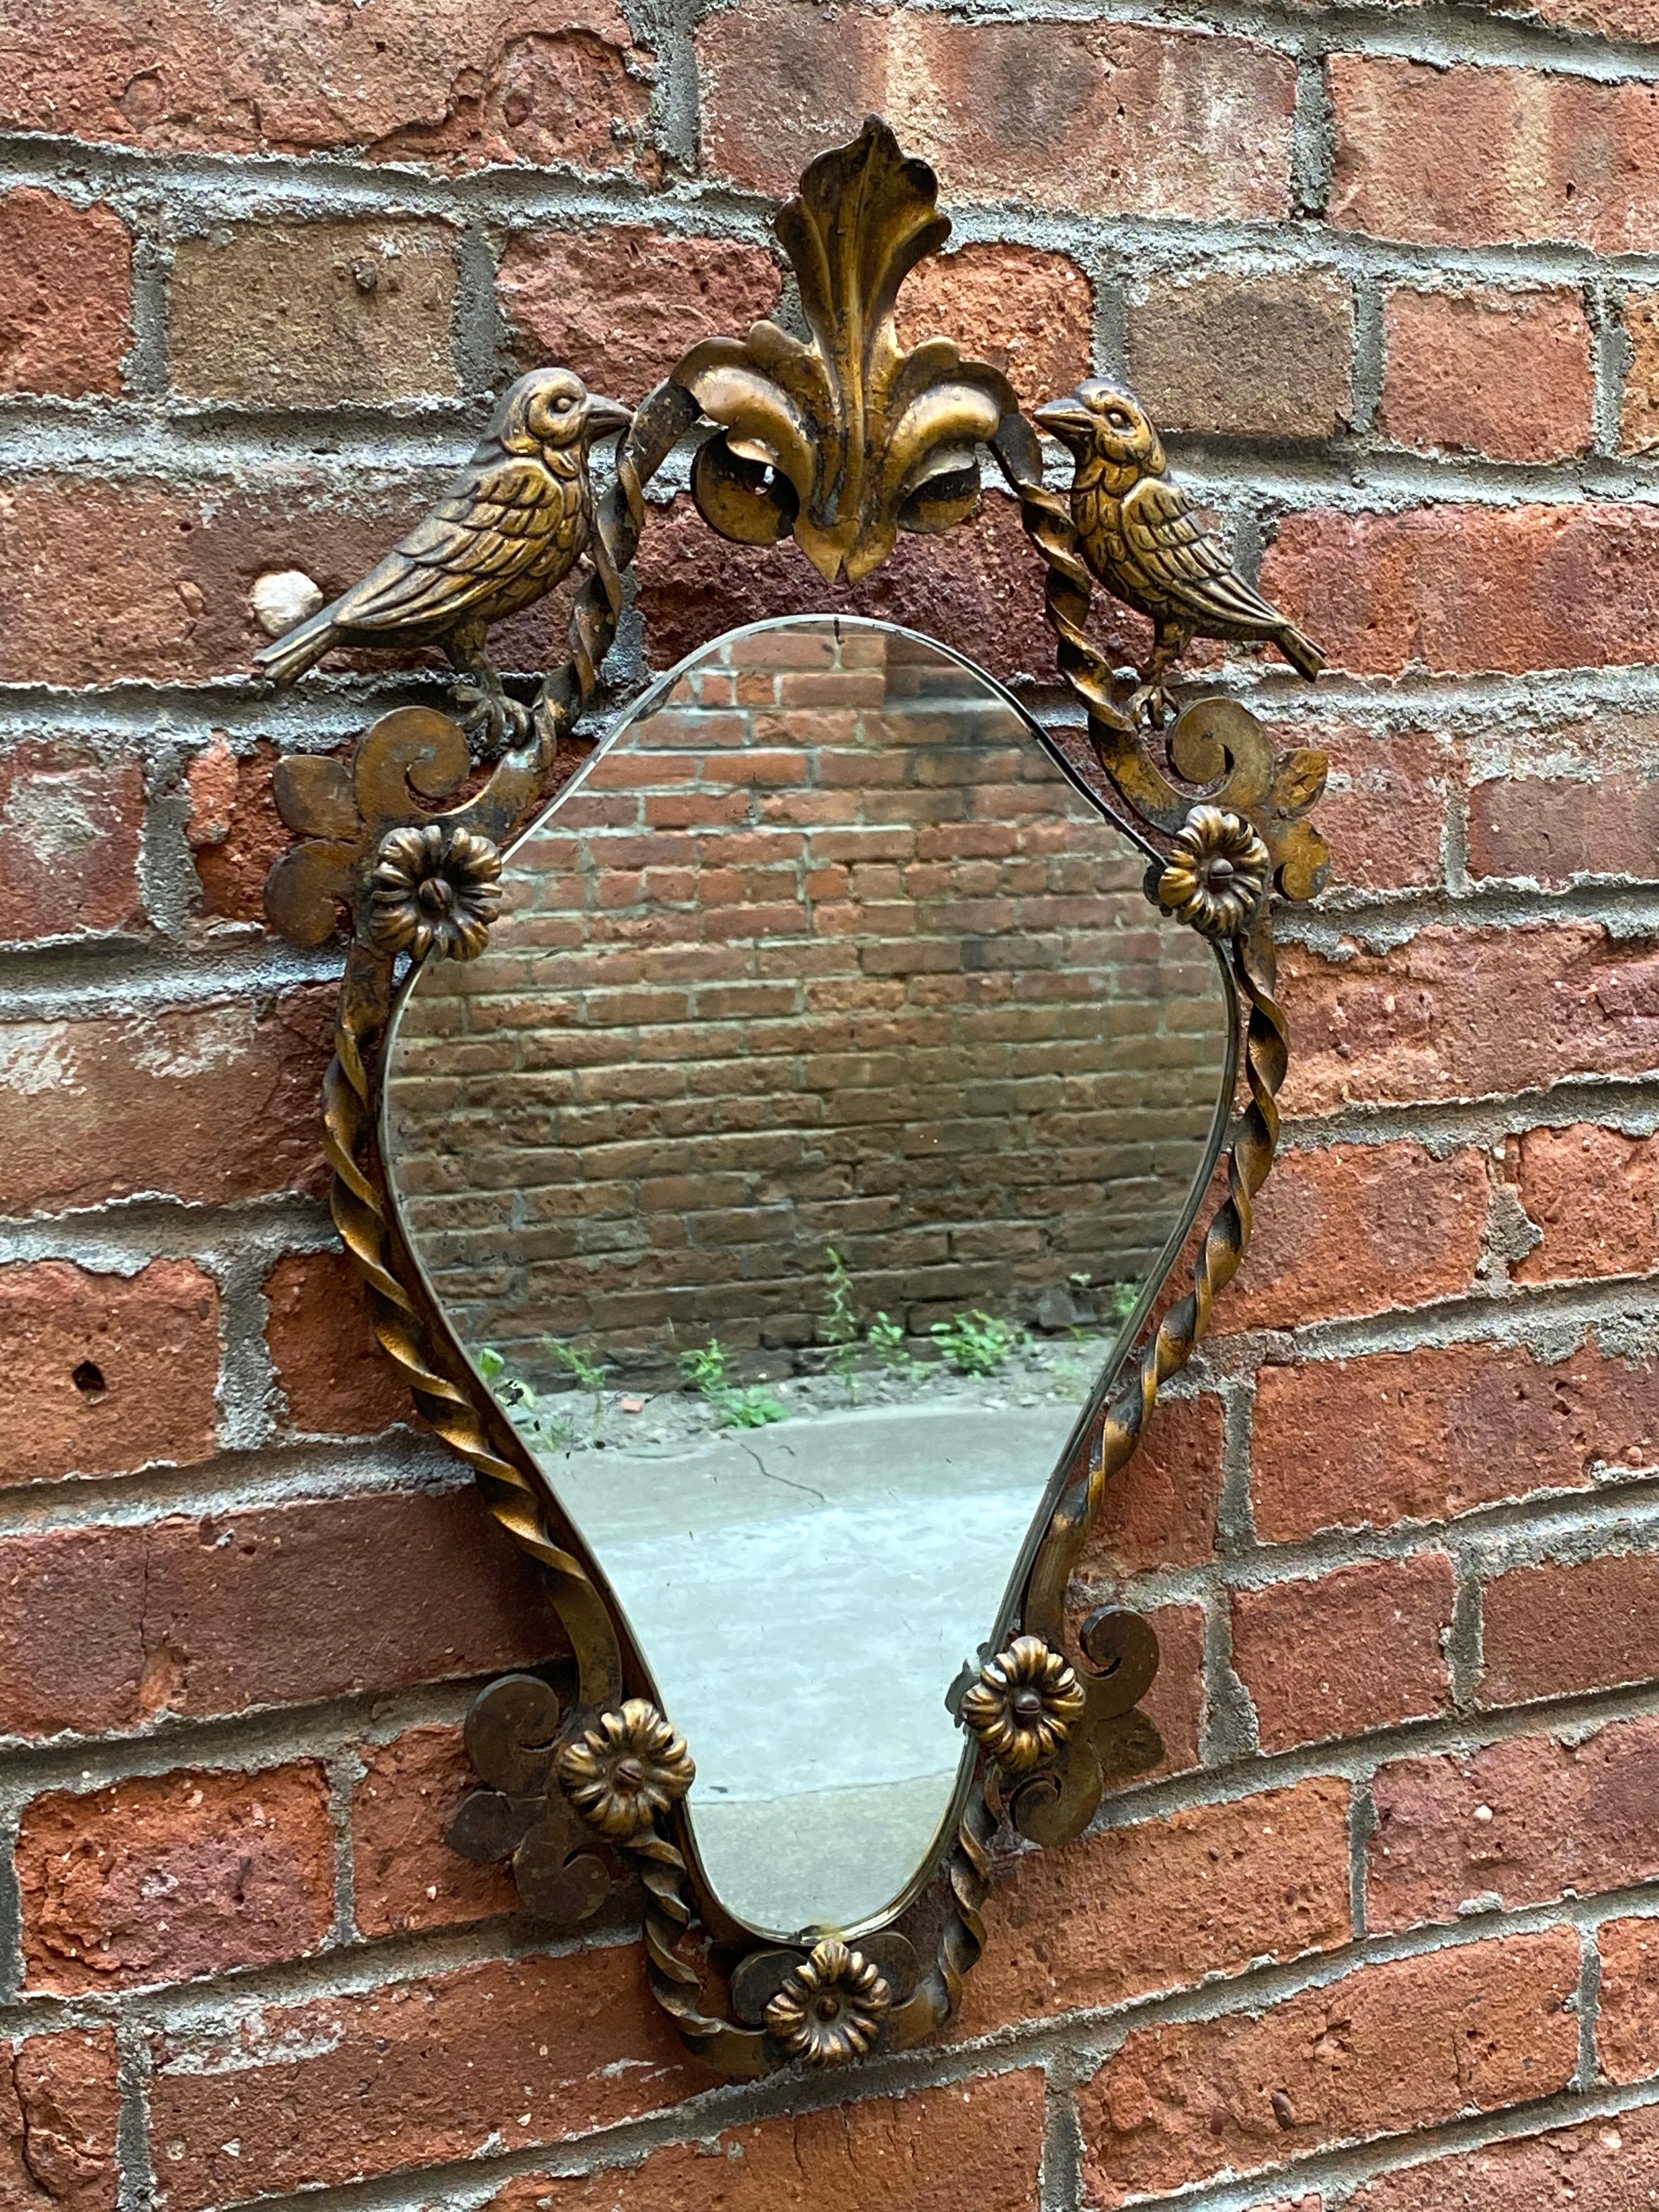 Rosettes, birds, fleur d'lis and twisted iron. Elegant and beautiful. Antiqued gold finish, circa 1920-1930. Overall good condition with some silvering losses to the mirror and edges (see photos).

Measures: Approximately .50